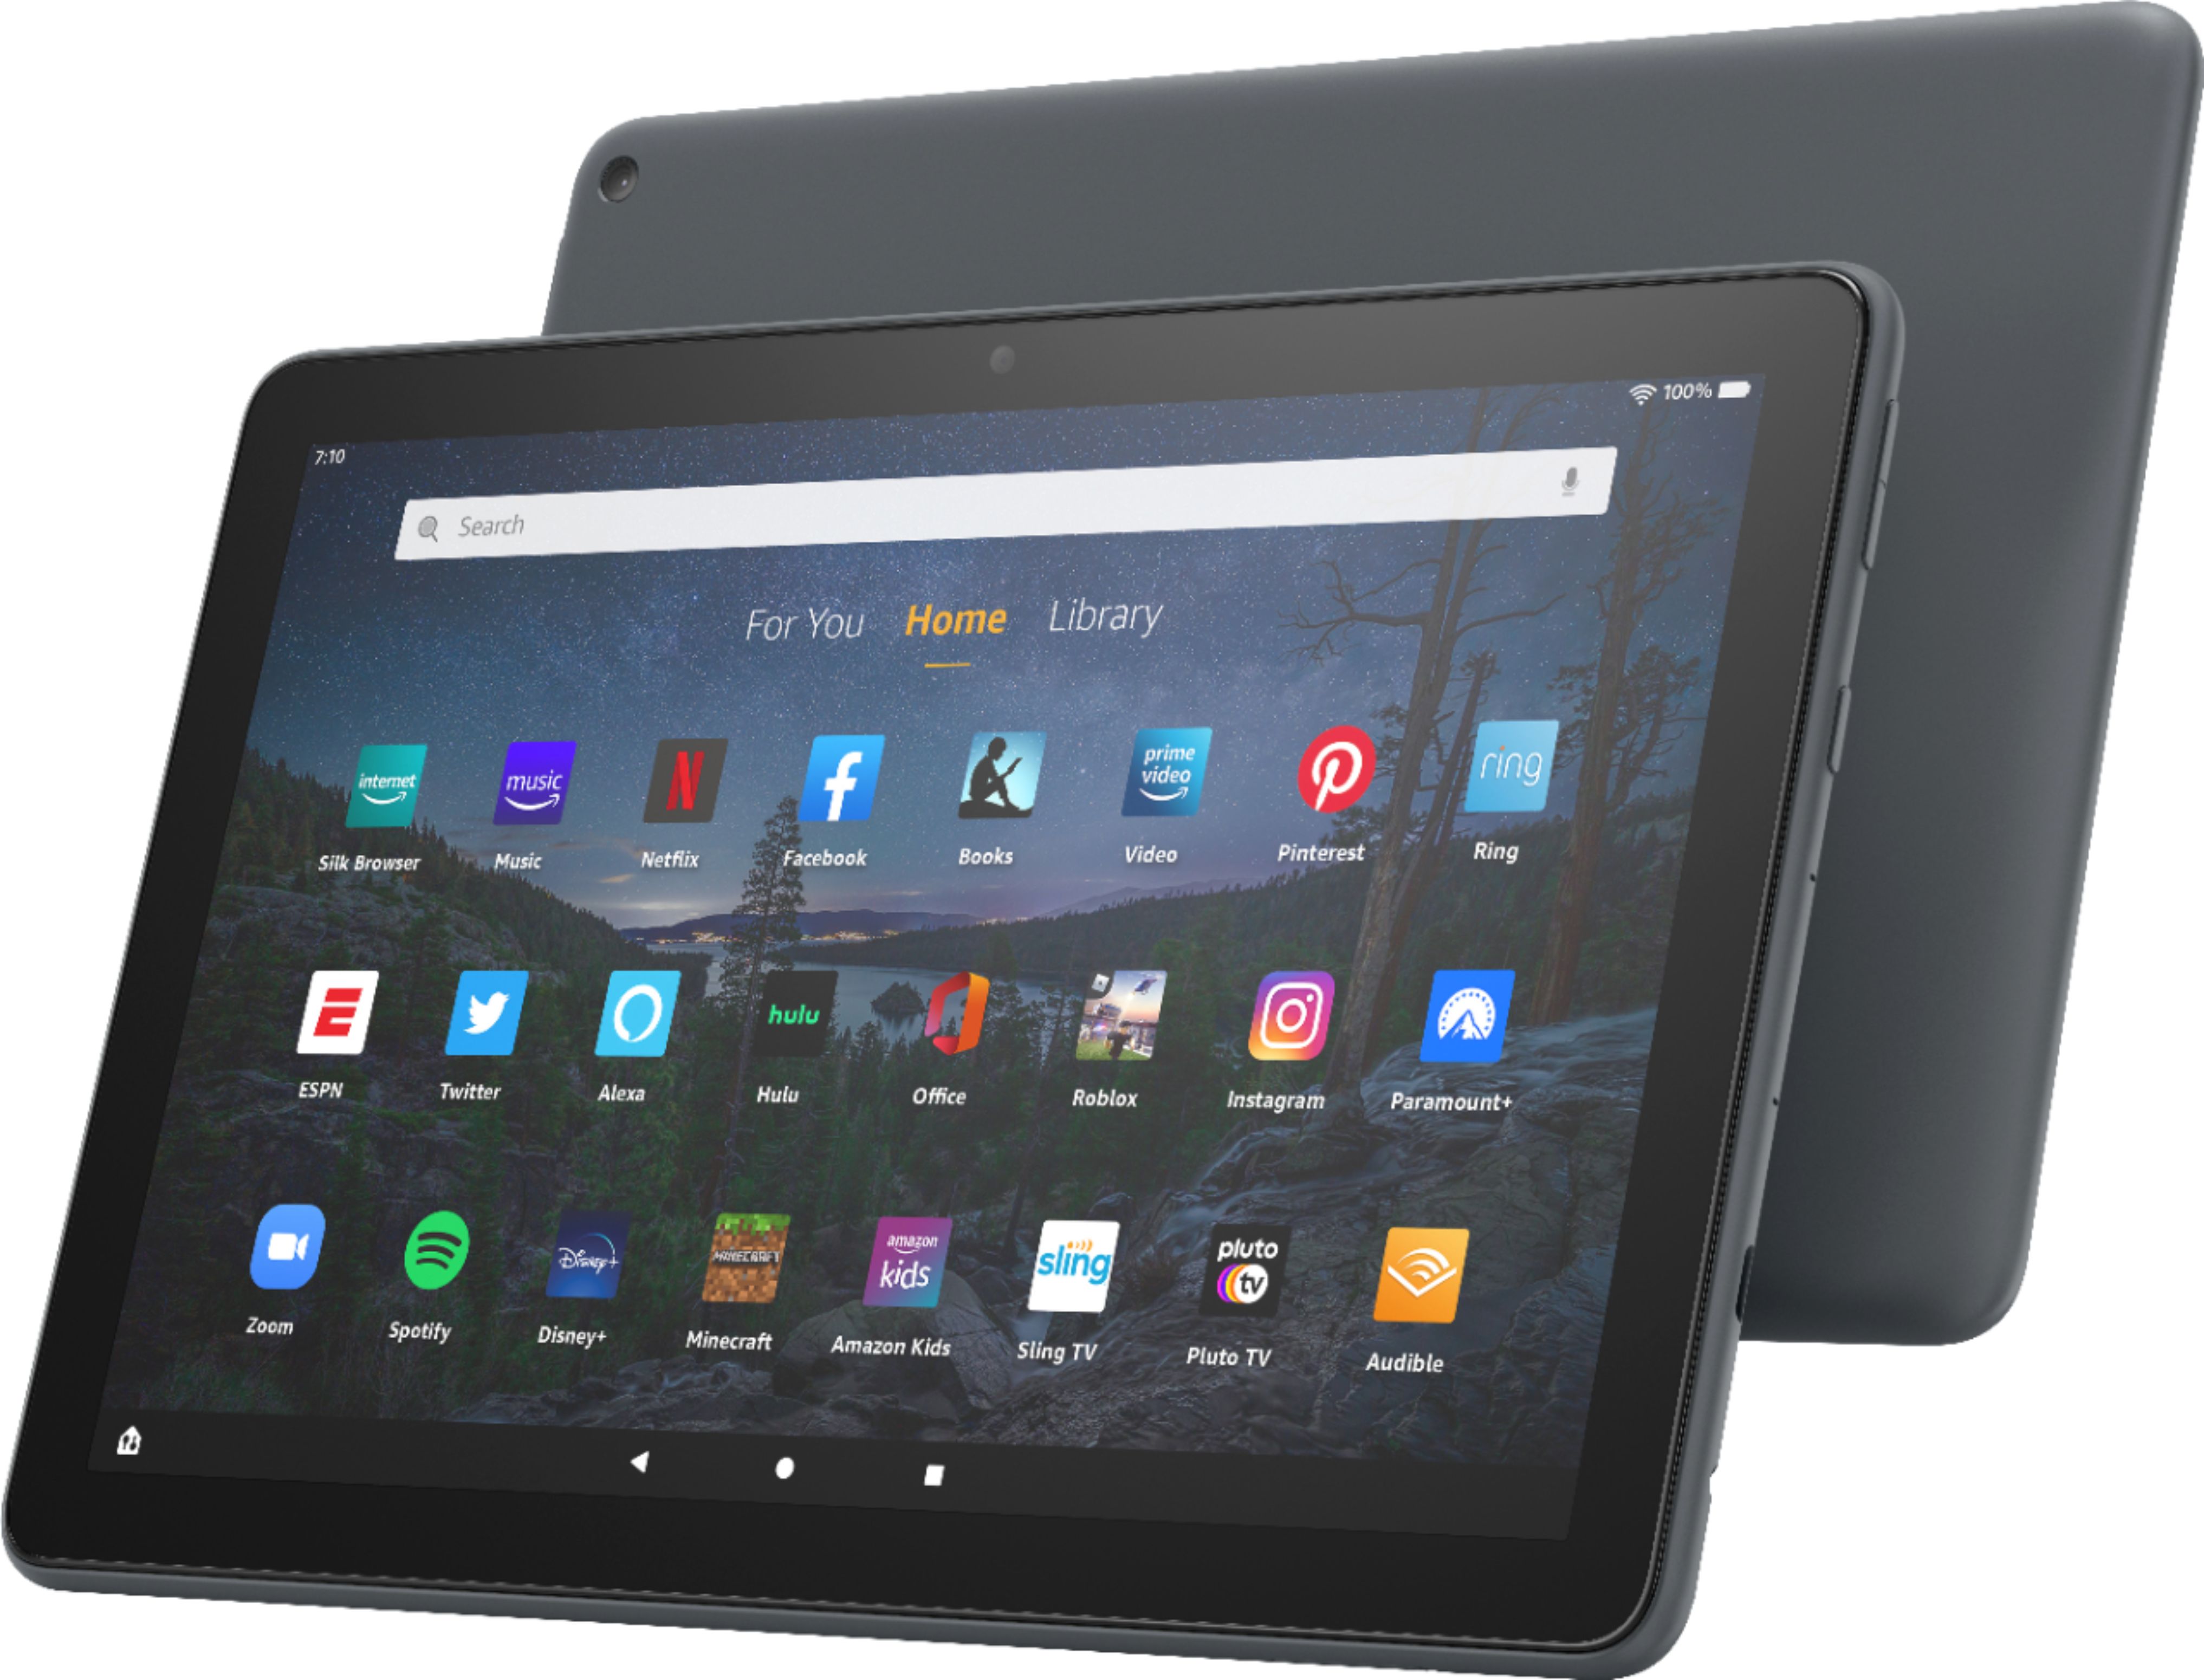 Questions and Answers Amazon Fire HD 10 Plus 10.1” Tablet 32 GB